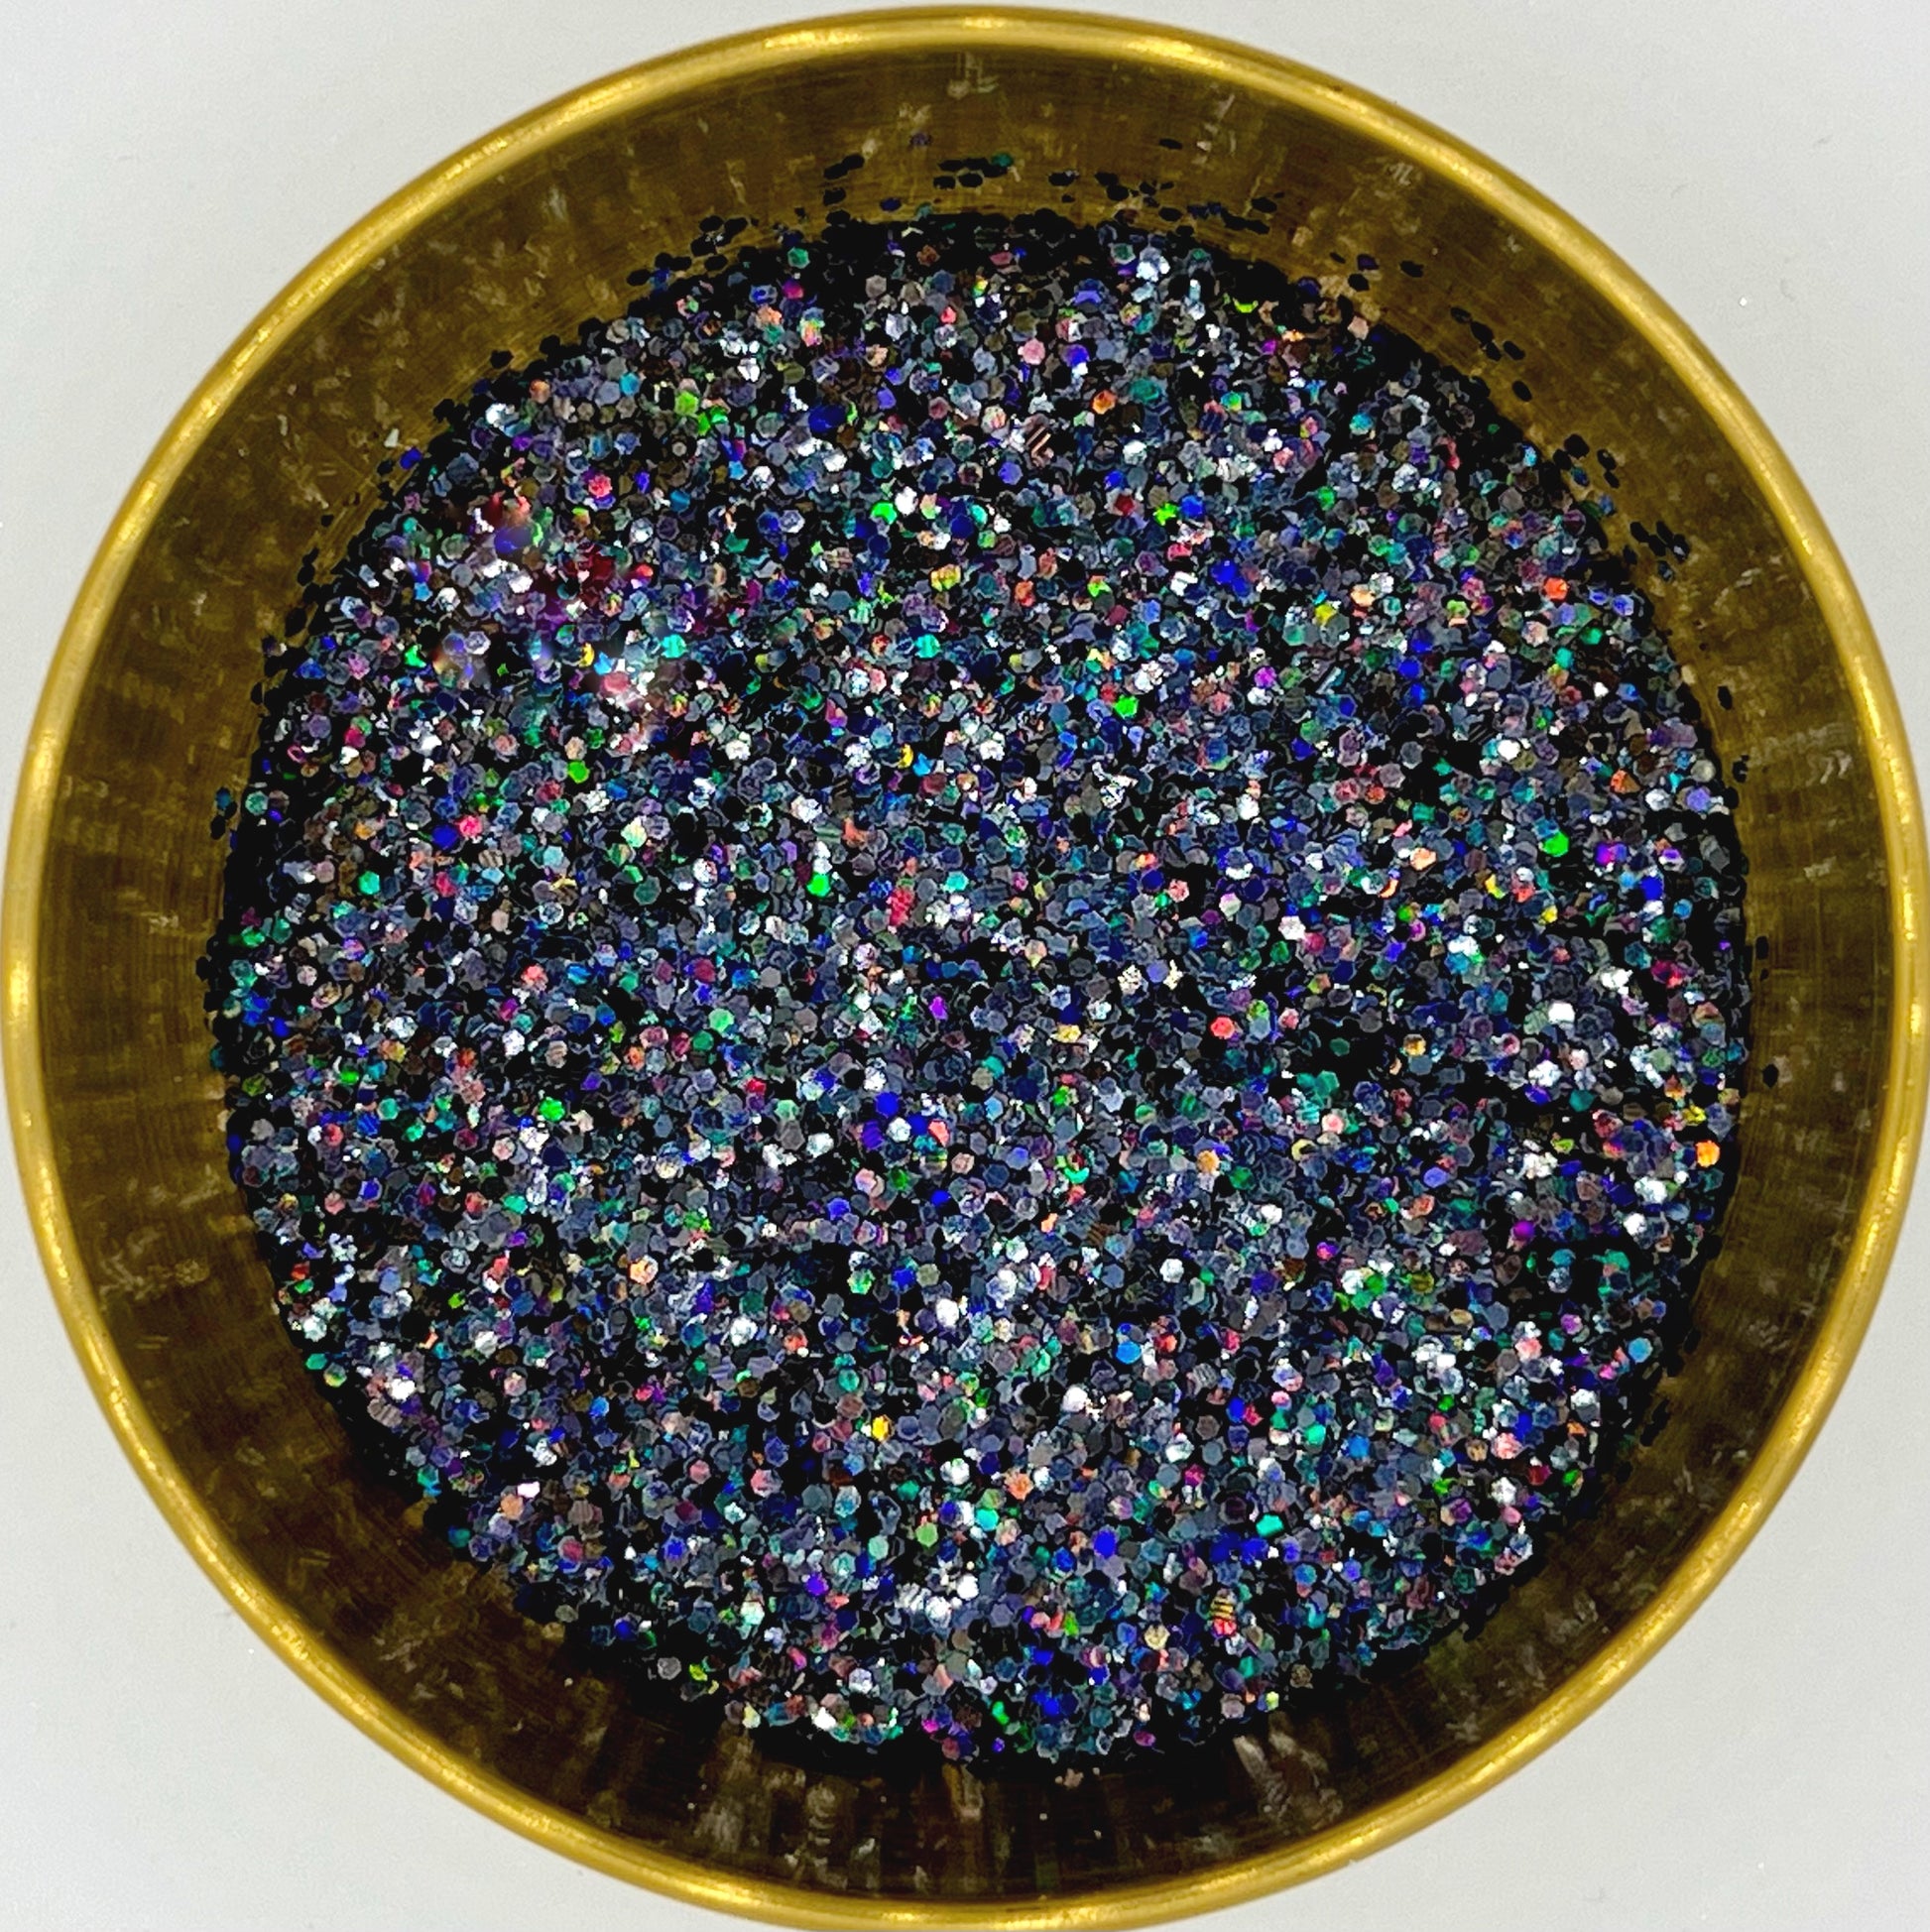 Terminator Extra Chunky Black Holographic Biodegradable Glitter